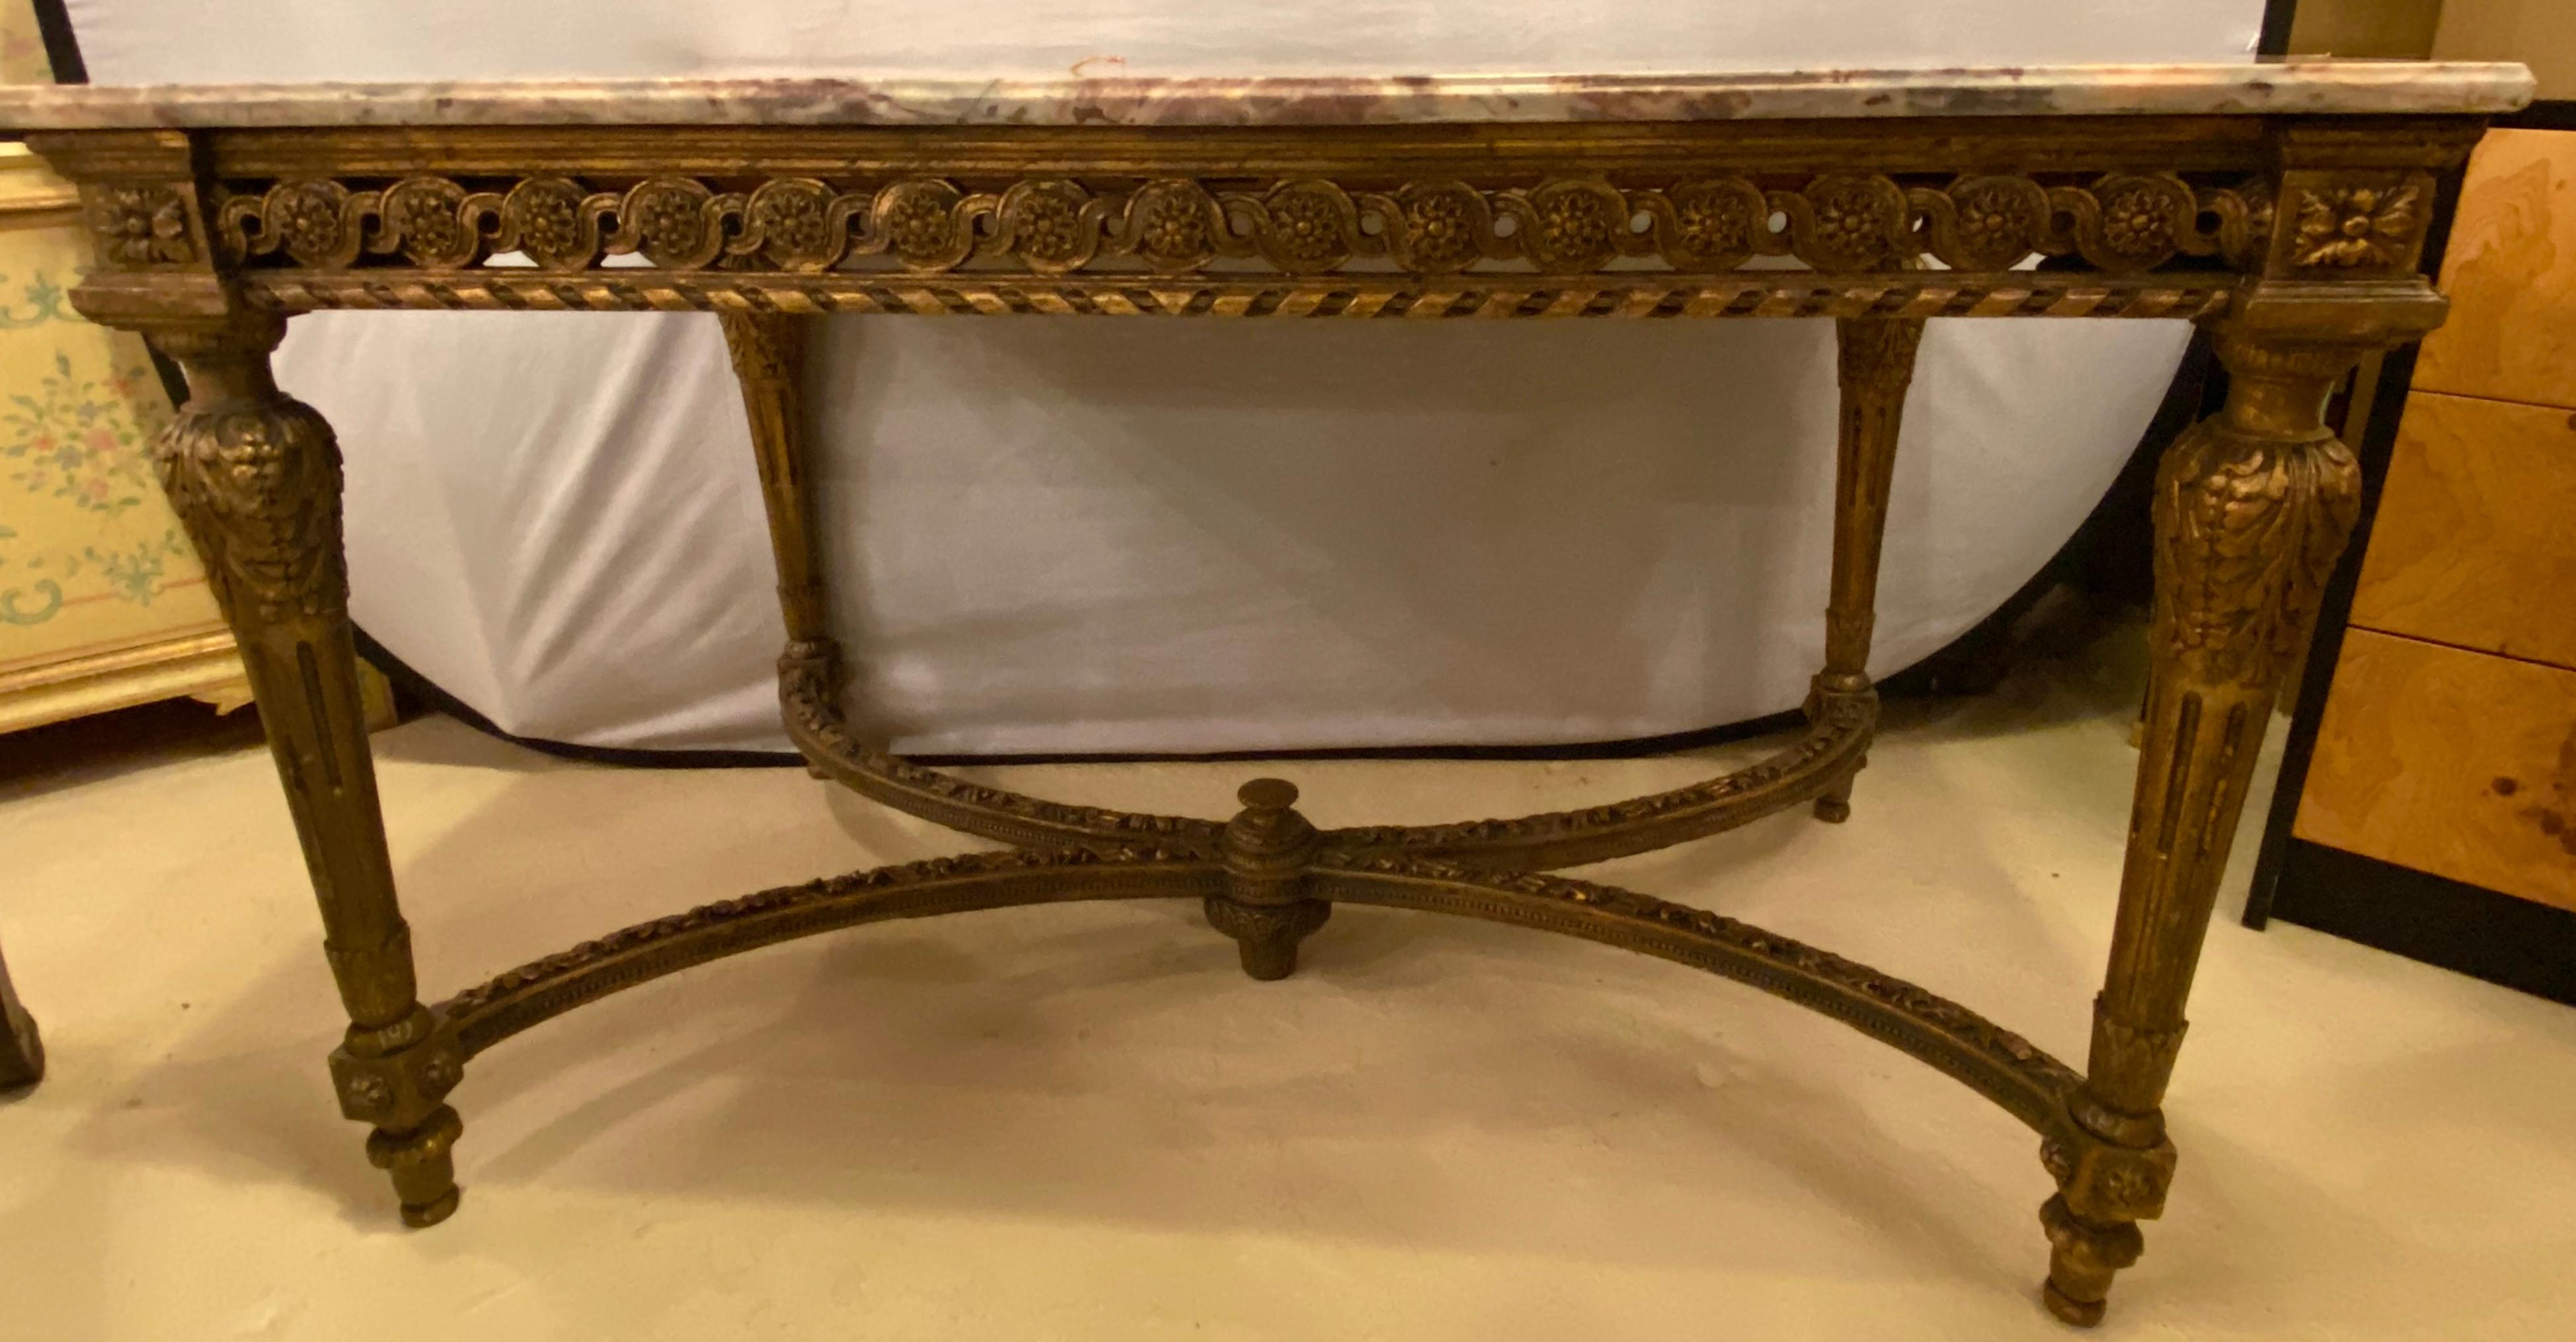 Center Table or Console Louis XVI Jansen Style Stunning Marble Top Gilt Base For Sale 7